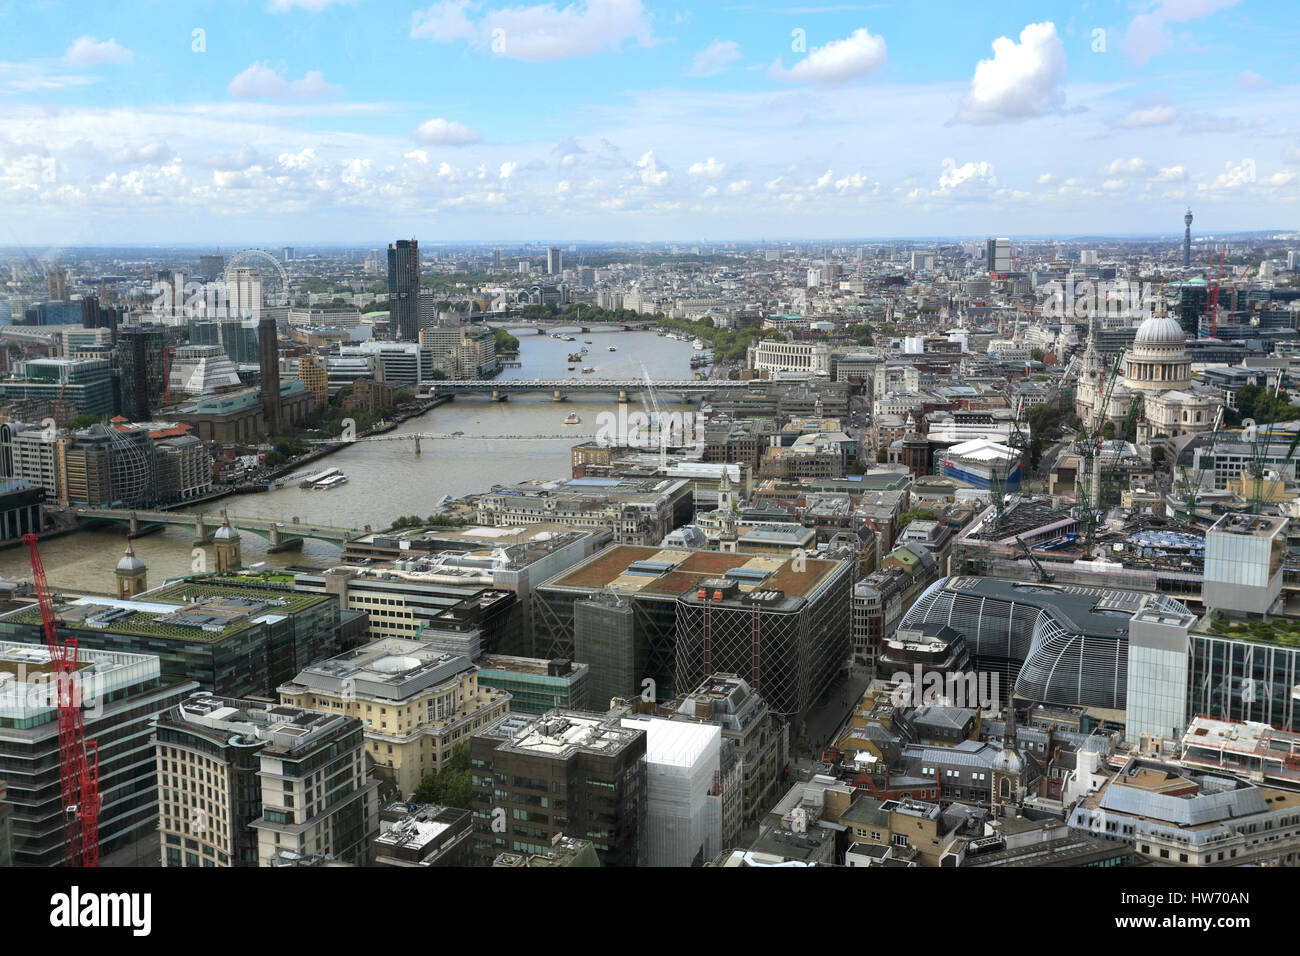 Rooftop view of London from the Walkie-Talkie building, 20 Fenchurch street, London City, England, UK Stock Photo